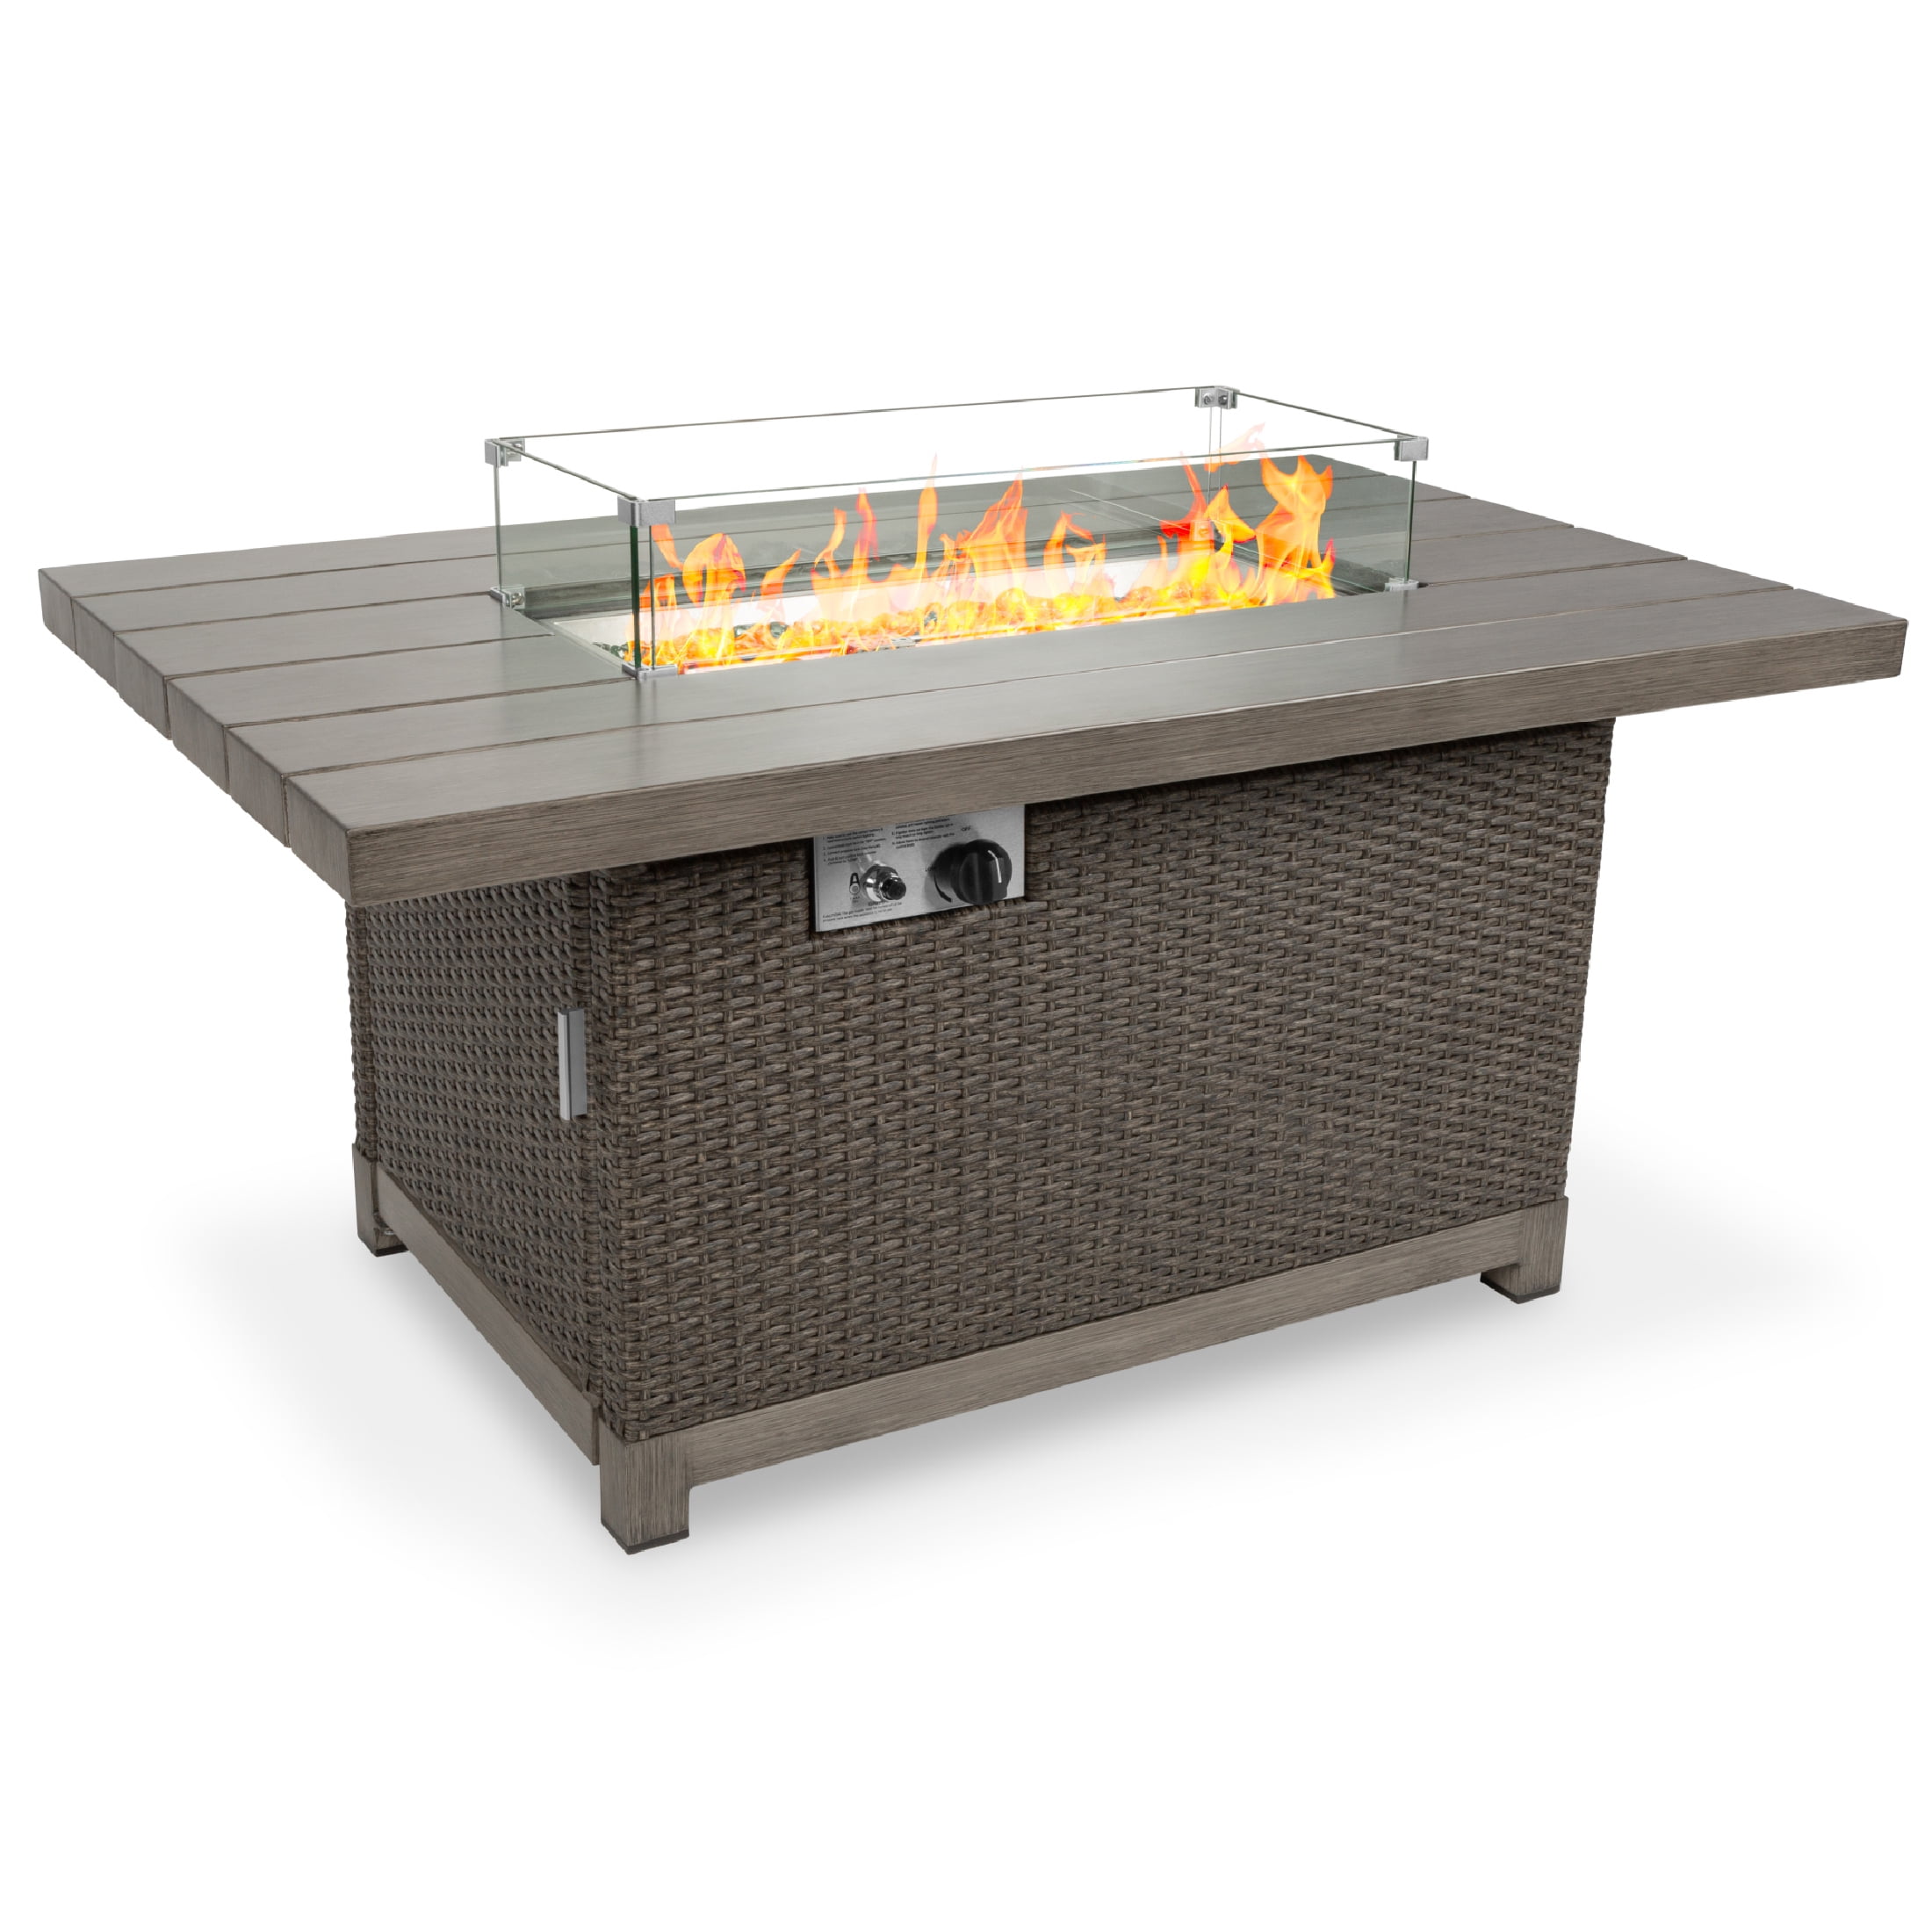 Best Choice S 52in Outdoor Wicker Propane Fire Pit Table 50 000 Btu W Glass Wind Guard Tank Holder Cover Brown, Round Wicker Fire Pit